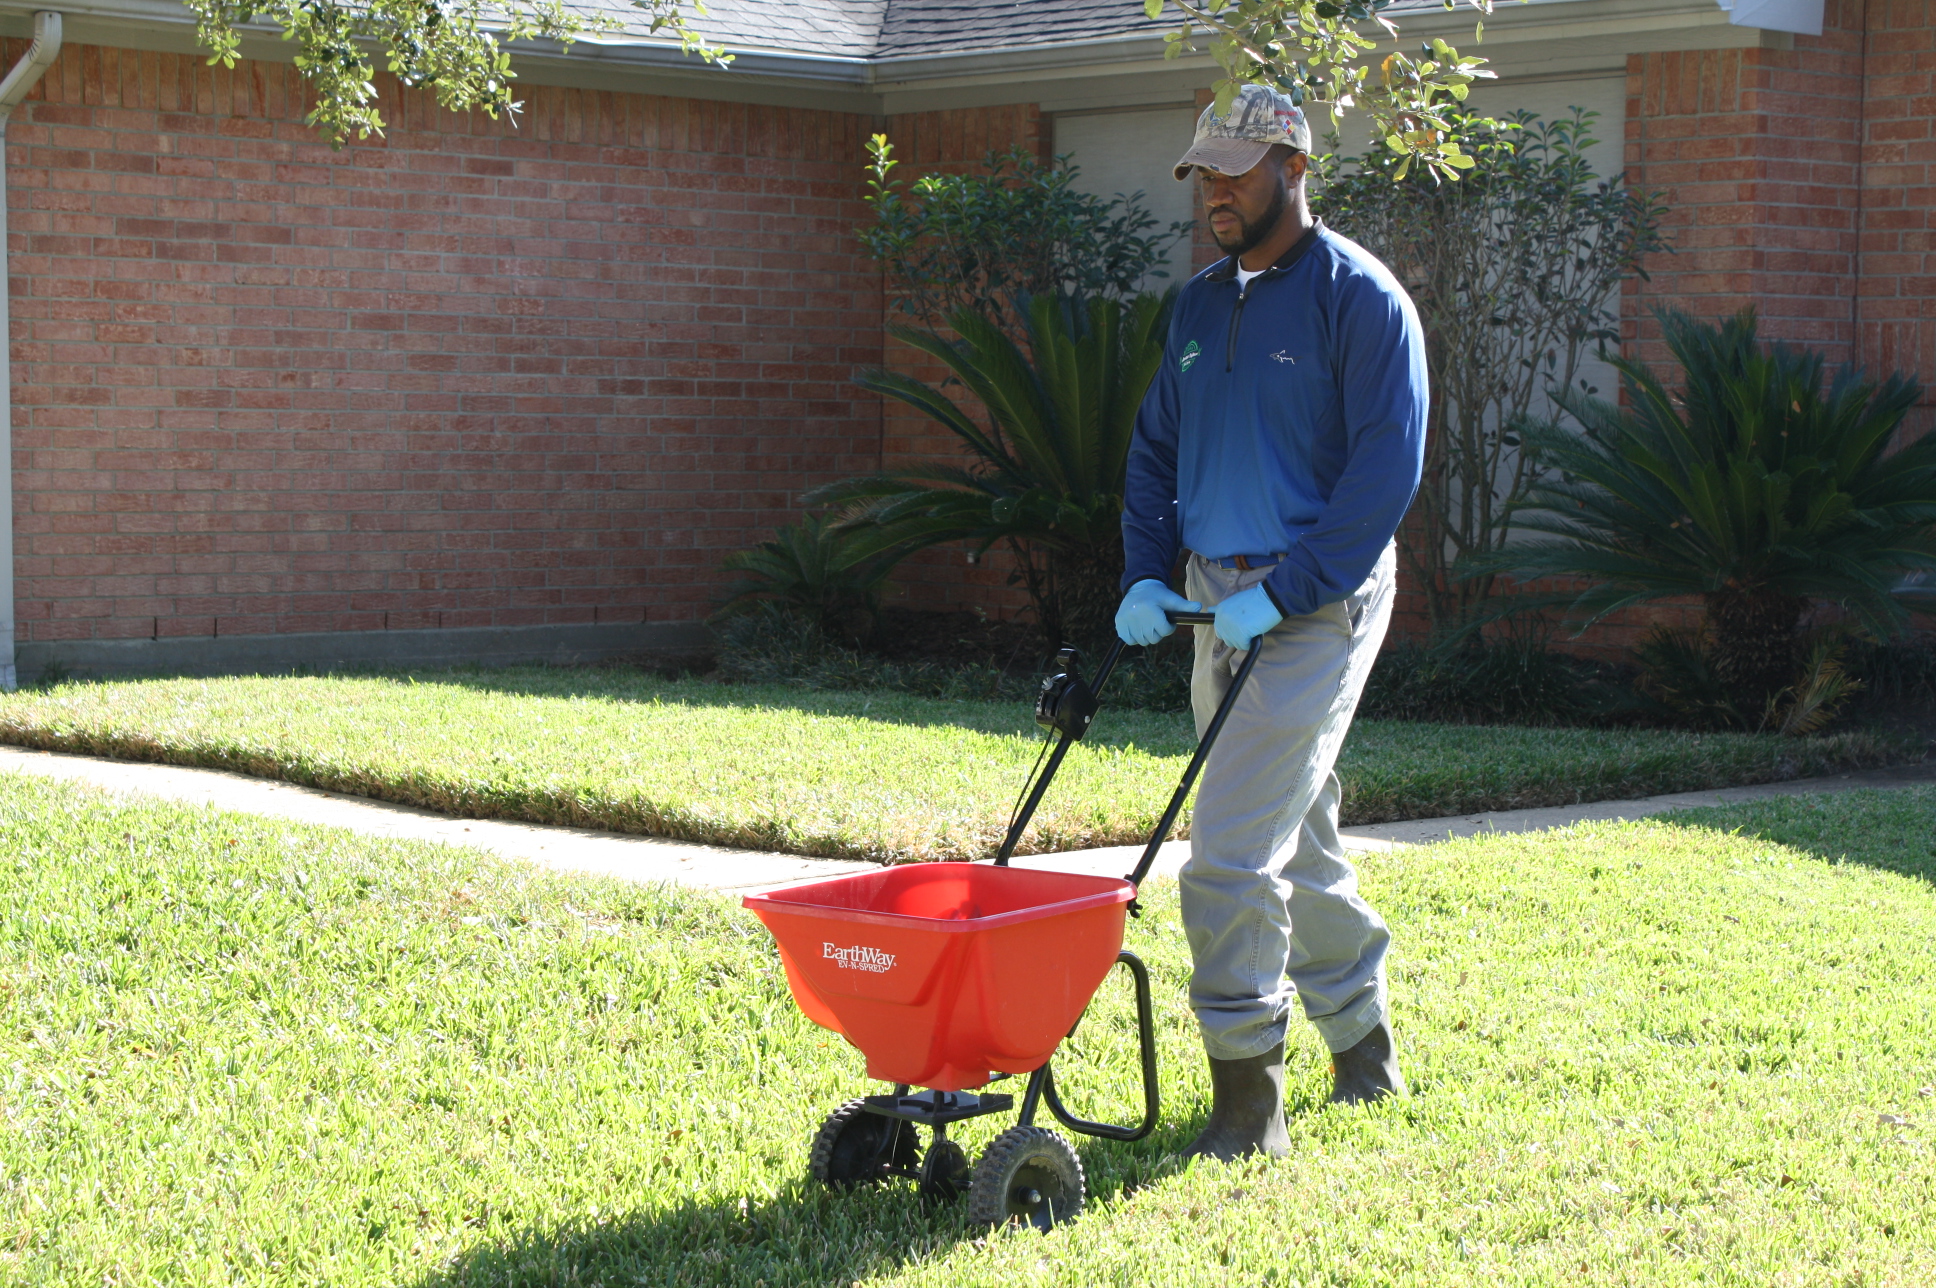 Absolute Defense Environmental Services is a full service company that offers more than typical pest control.